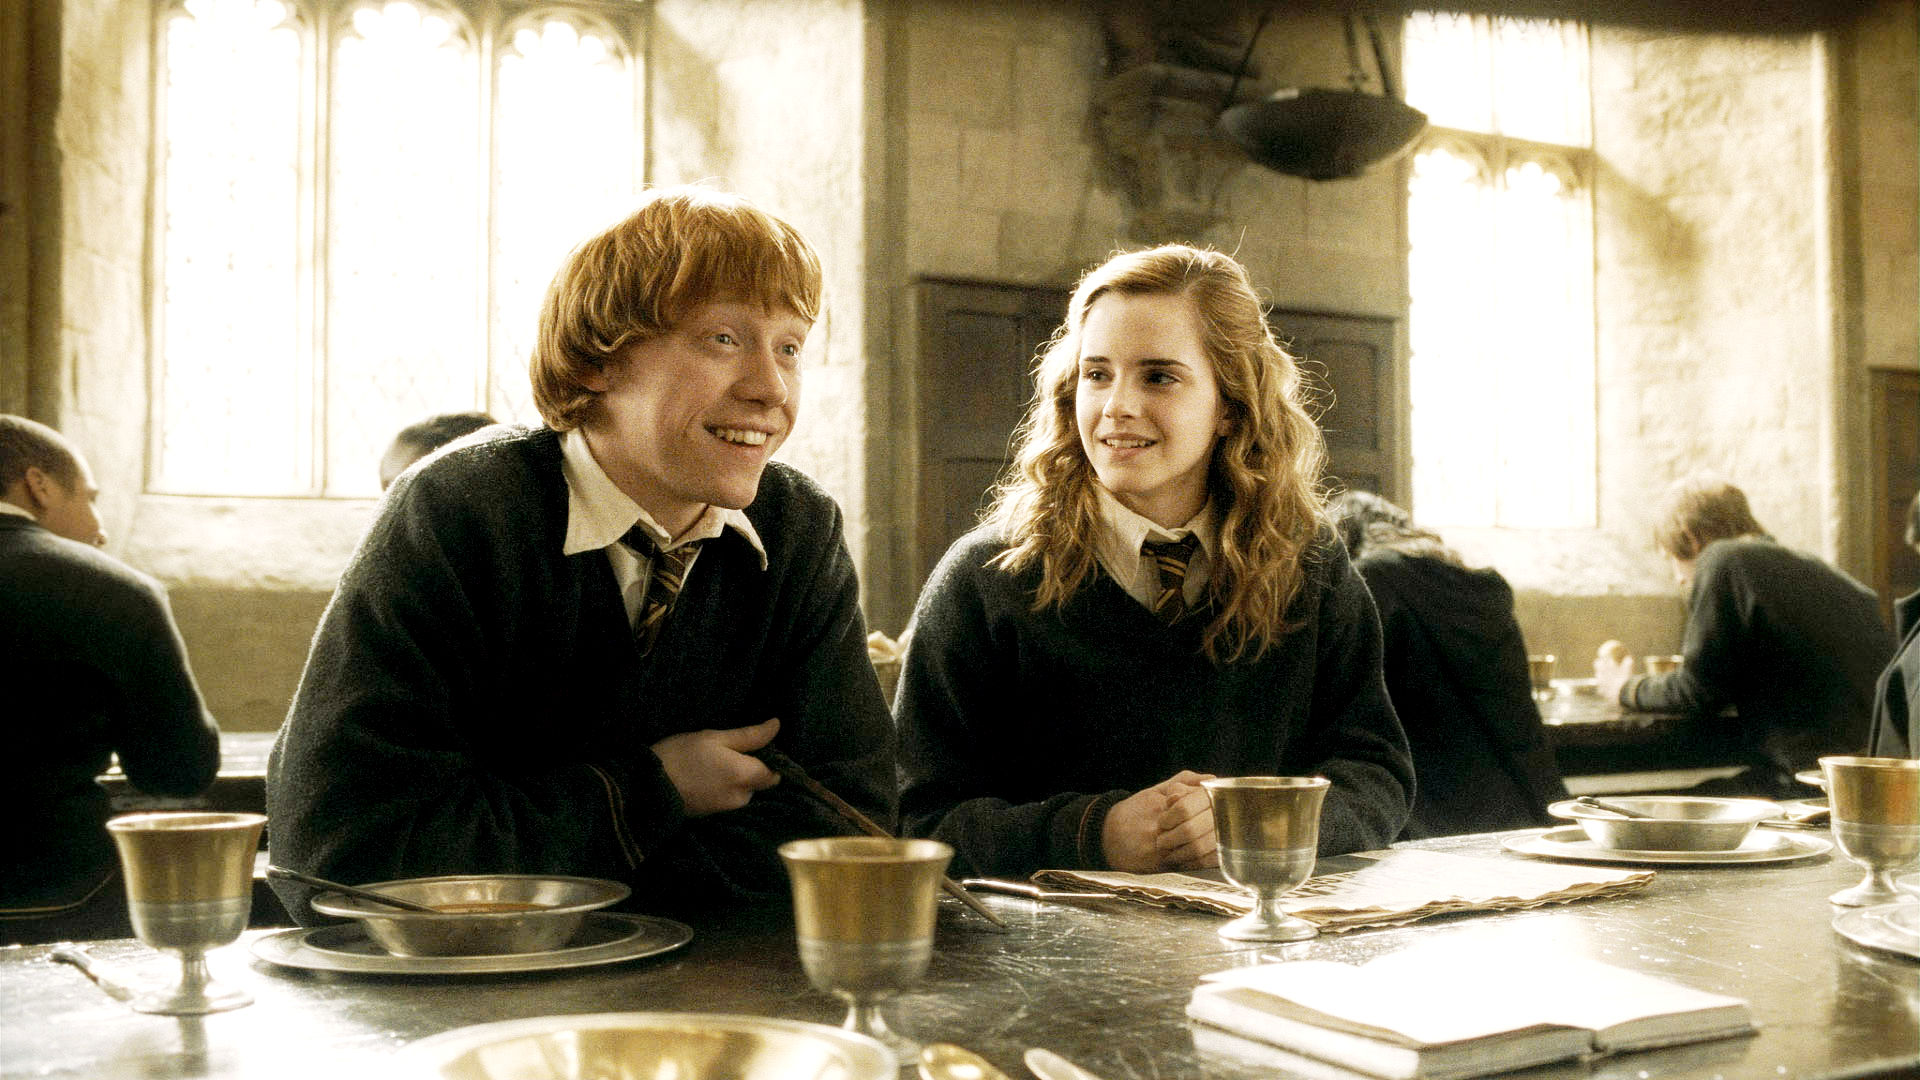 Rupert Grint stars as Ron Weasley and Emma Watson stars as Hermione Granger in Warner Bros Pictures' Harry Potter and the Half-Blood Prince (2009)